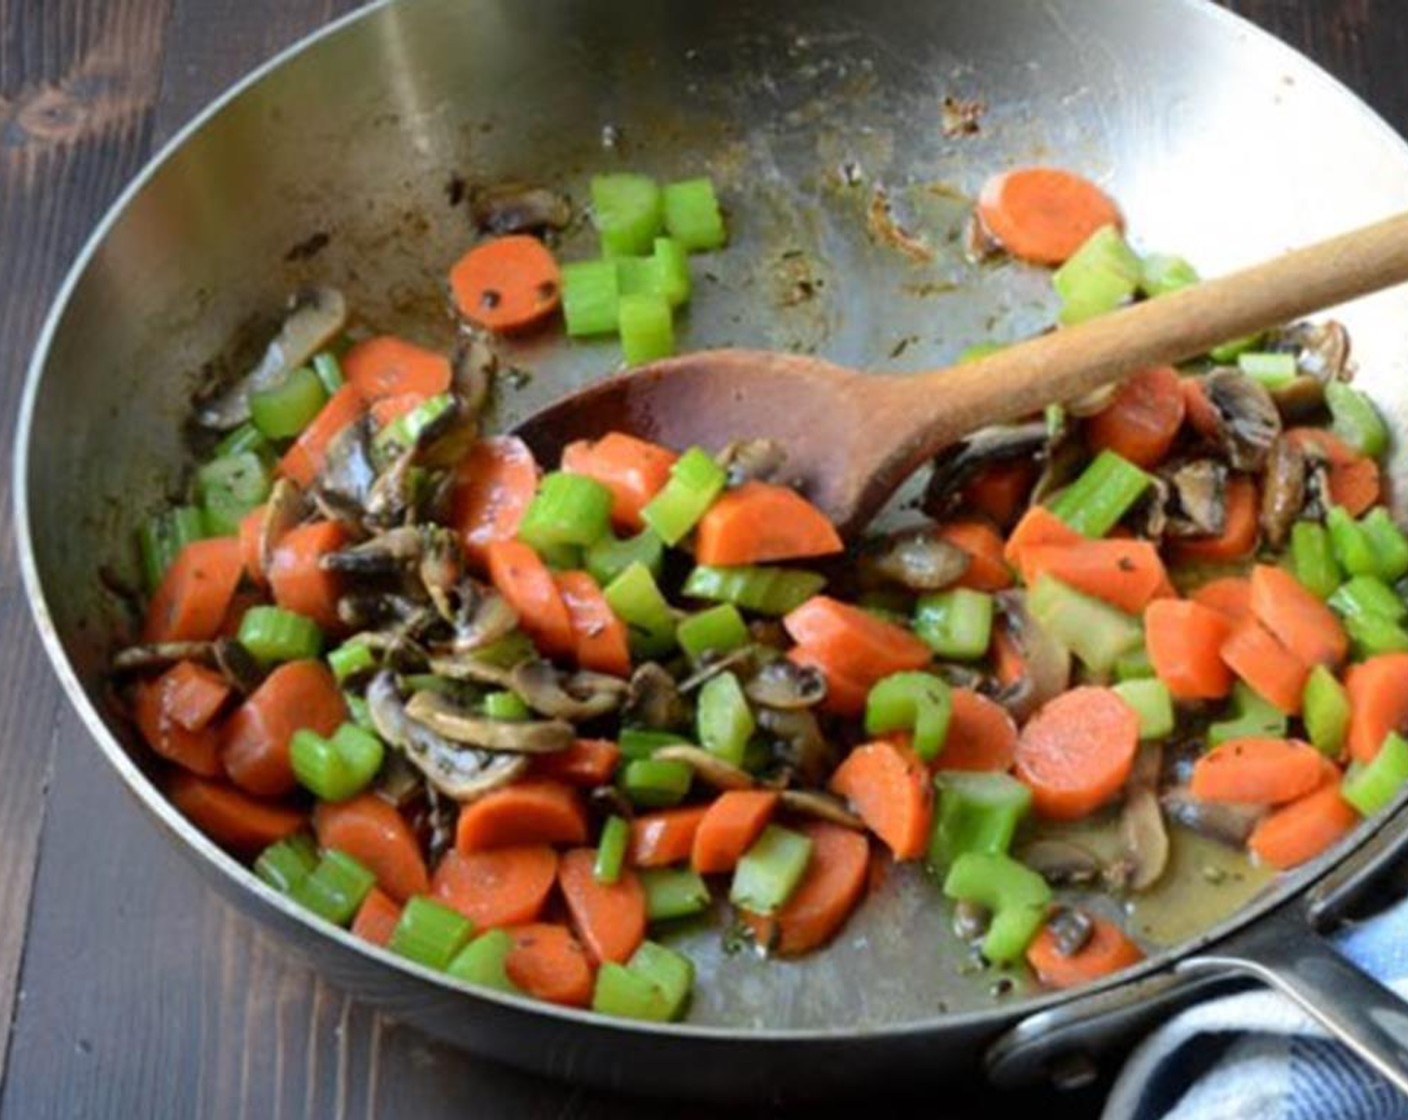 step 4 Saute until vegetables are just tender for about 6 to 7 minutes.